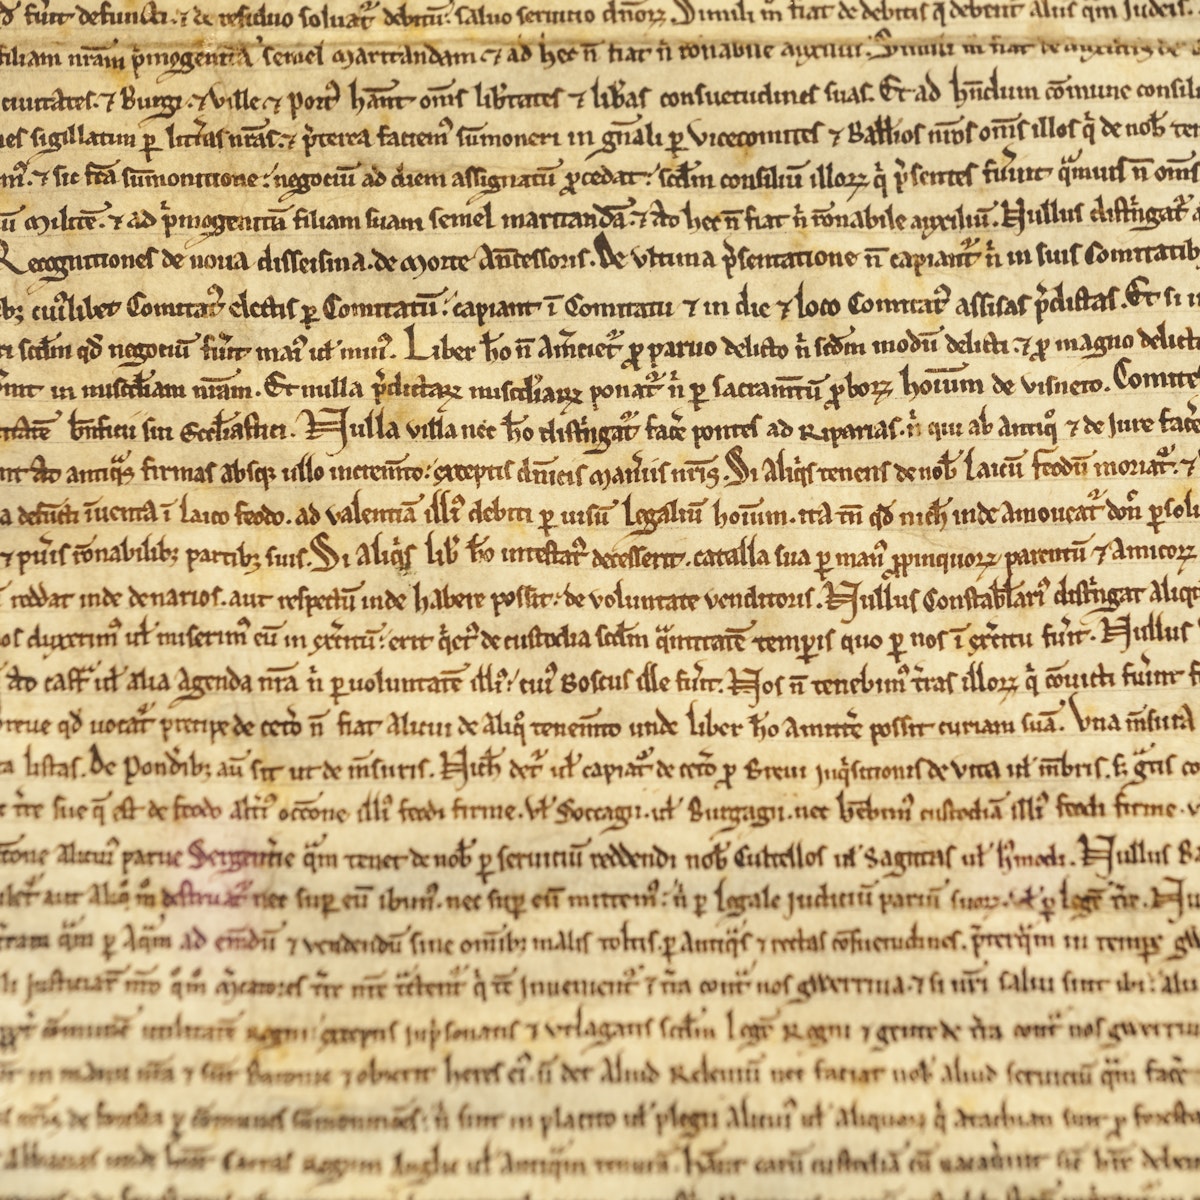 Magna Carta in Salisbury Cathedral, England. It is a charter agreed by King John of England at Runnymede, near Windsor, on 15 June 1215. First drafted by the Archbishop of Canterbury to make peace between the unpopular King and a group of rebel barons, it promised the protection of church rights, protection for the barons from illegal imprisonment, access to swift justice, and limitations on feudal payments to the Crown, to be implemented through a council of 25 barons. It influenced the early American colonists in the Thirteen Colonies and the formation of the American Constitution in 1789, which became the supreme law of the land in the new republic of the United States.